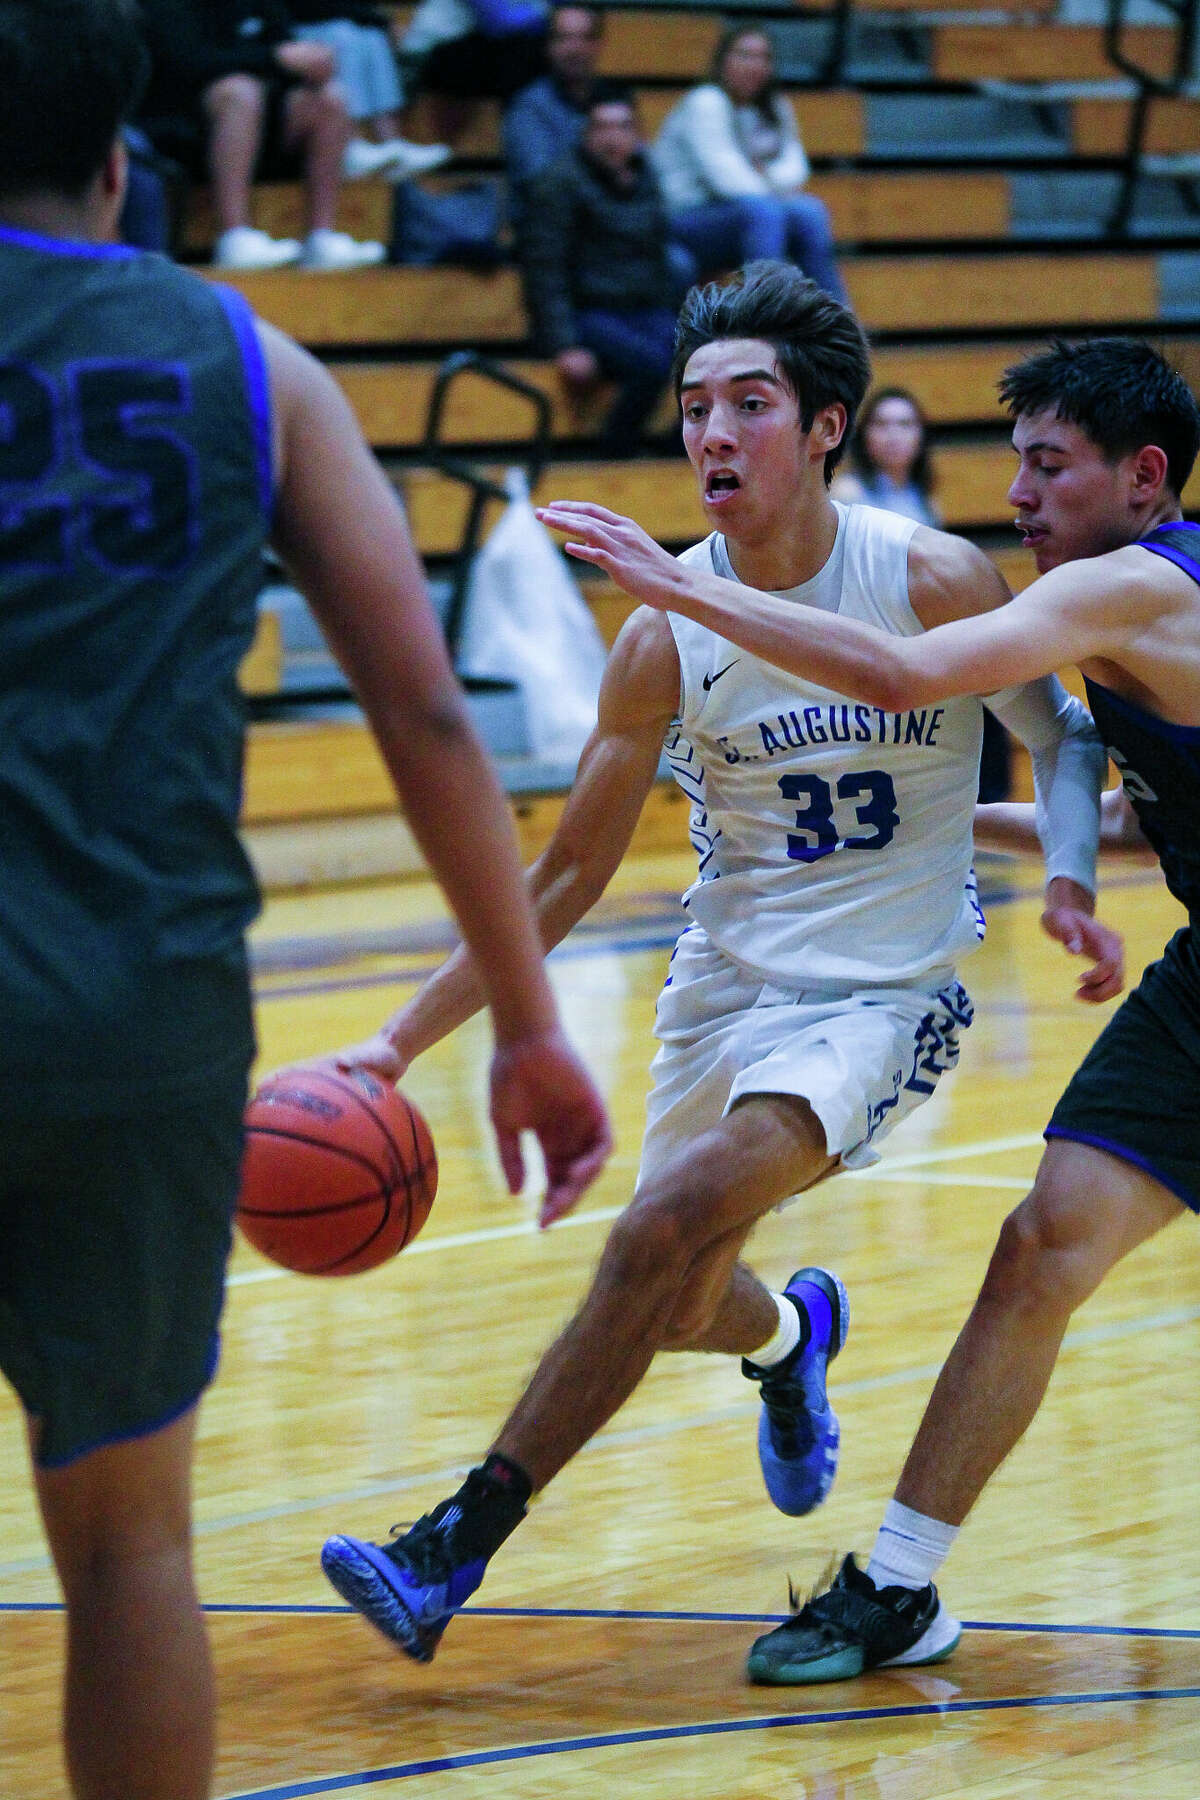 The Knights continue to perform well. They soundly defeated Martin on Tuesday before their break. They have the opportunity to beat five local programs this year as they will host Alexander in a 2:30 p.m. matchup on Dec. 30. St. Augustine continues to be powered by seniors Octavio Benavides, Rafa Garcia and Chris Ramirez.